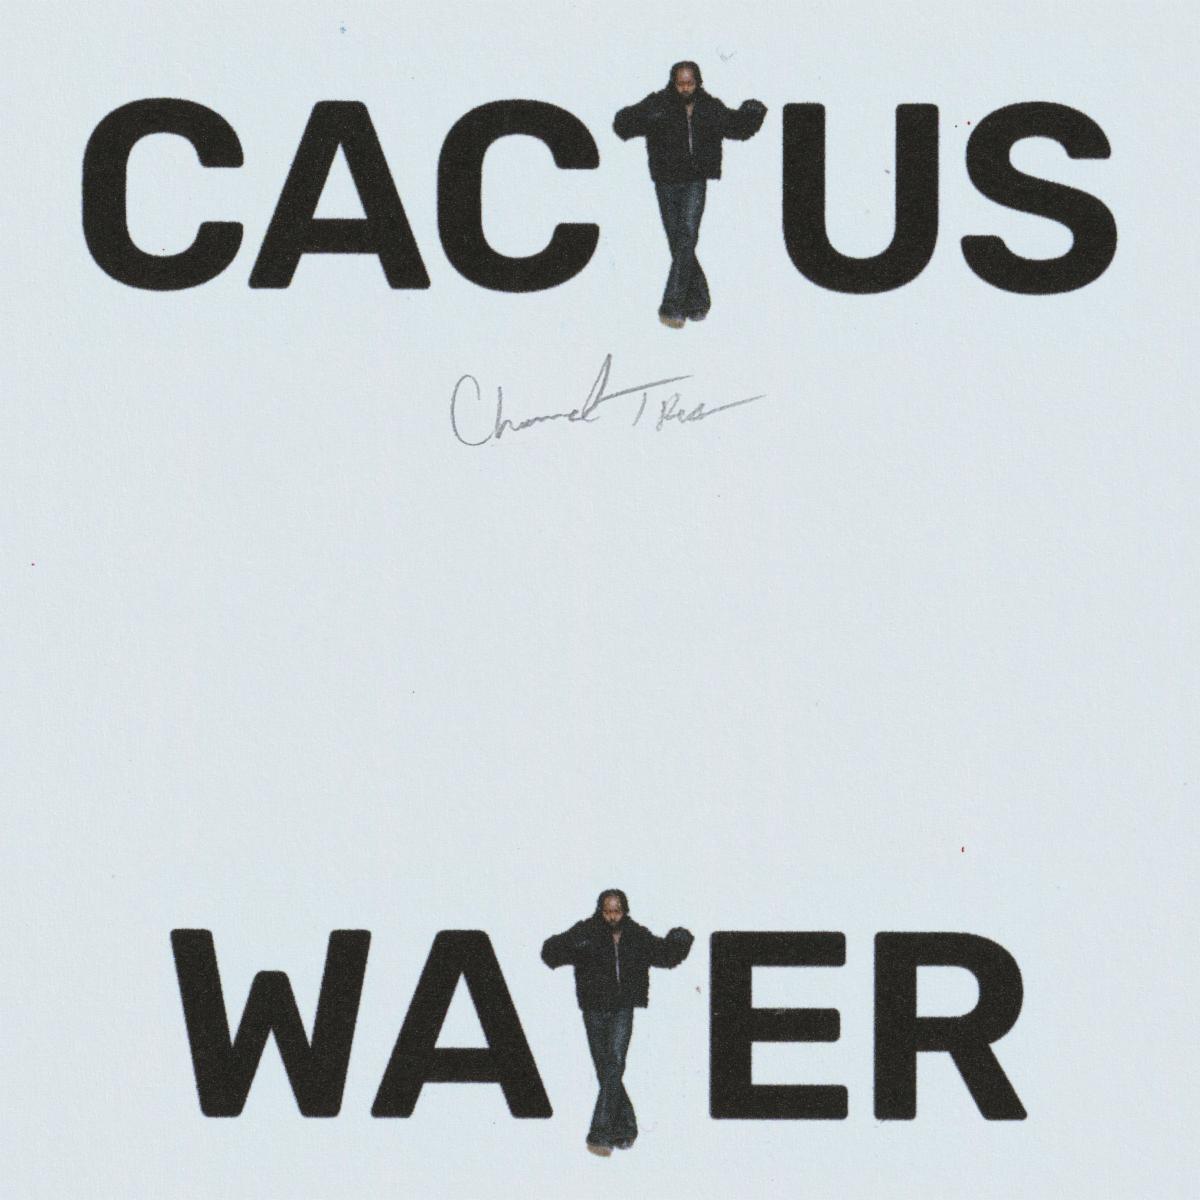 Channel Tres releases new single 'Cactus Water'

imprintent.org/channel-tres-r…

#IMPRINTent #channeltres #music